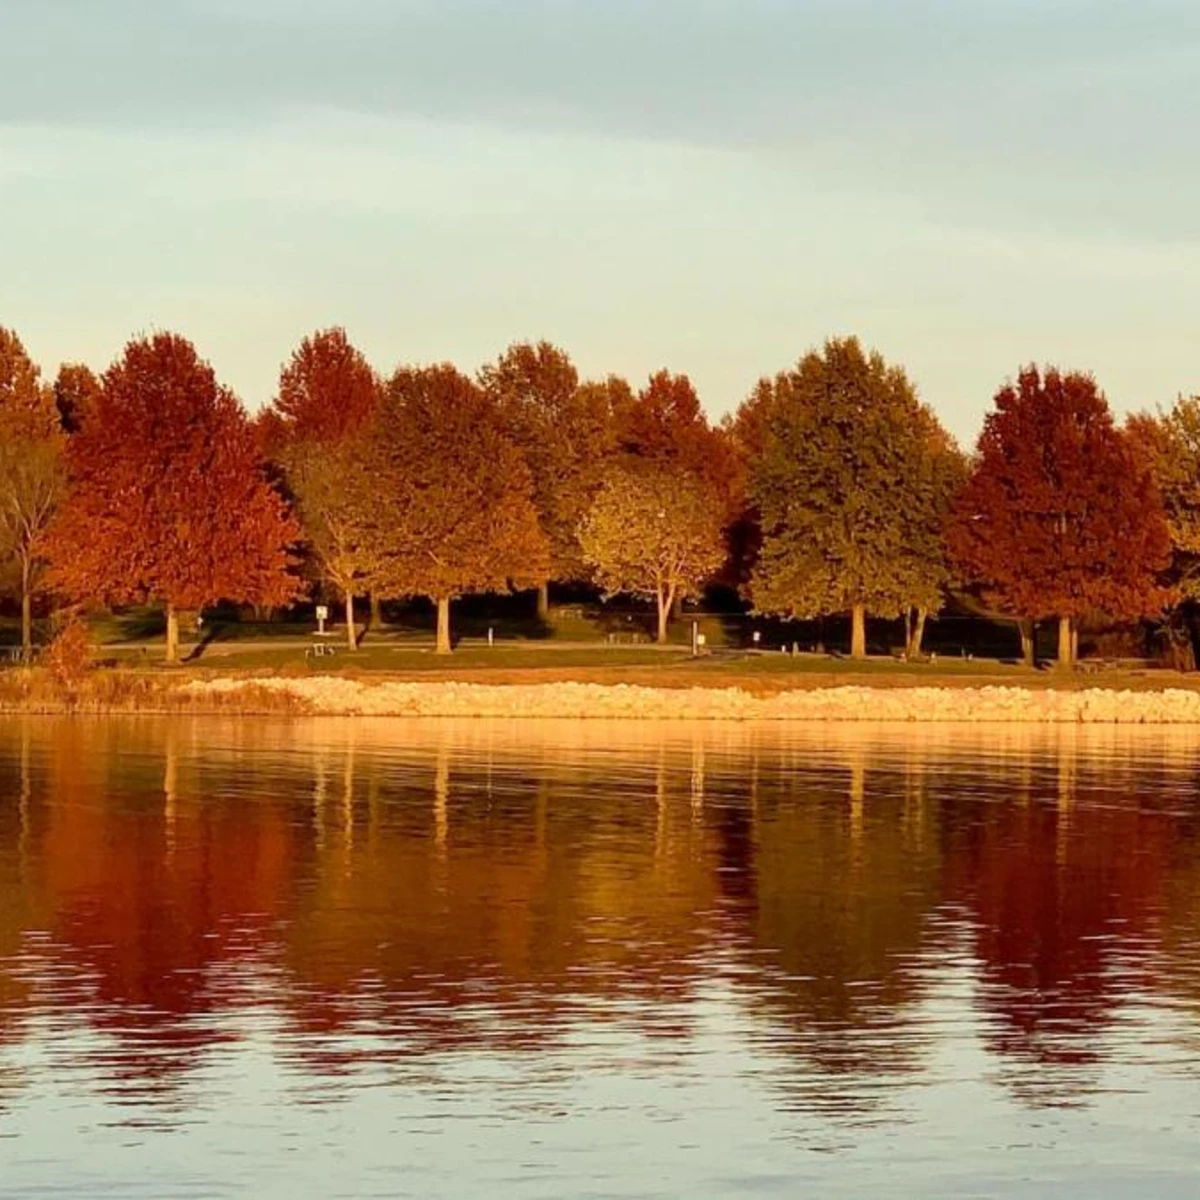 Fall foliage of red, auburn and orange trees reflecting on clear lake in Missouri.